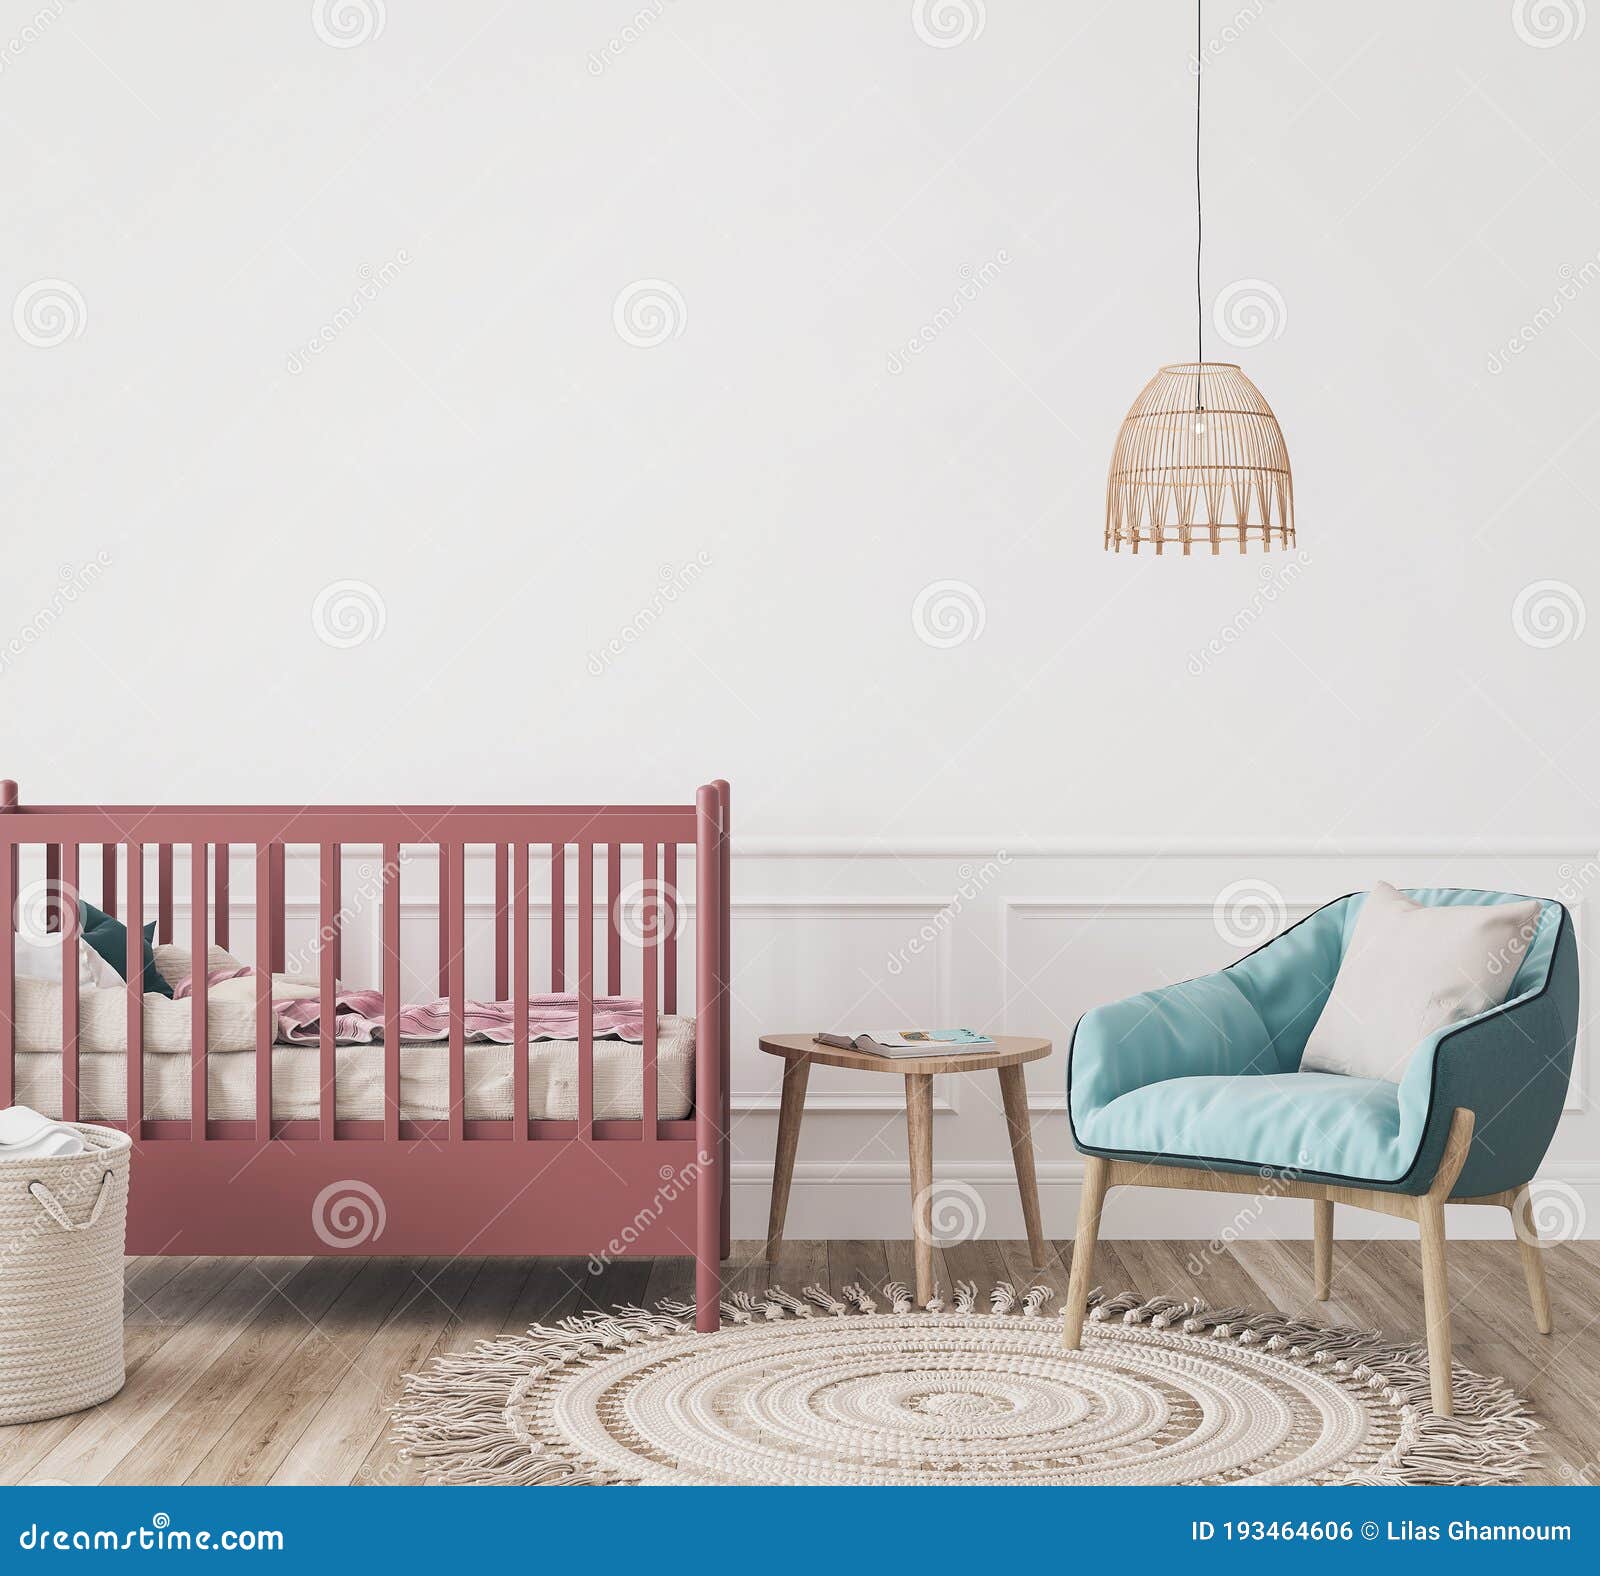 stylish colorful baby room, modern bedroom for newborn baby with crib, scandinavian style